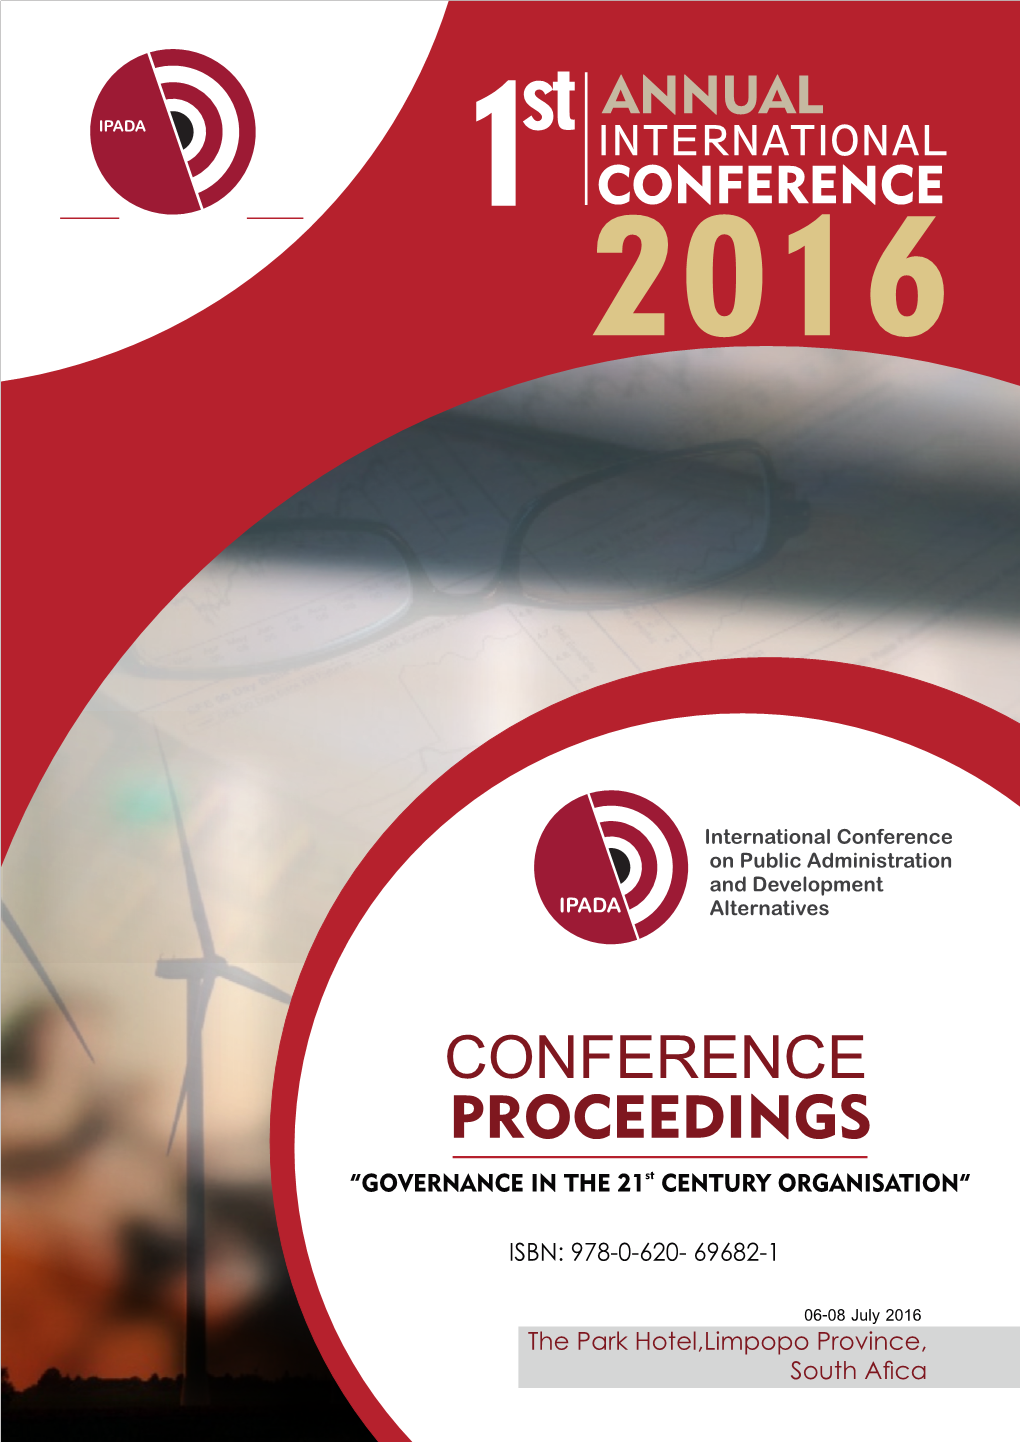 (IPADA) Conference Proceedings 2016, 16 Other Quality Papers